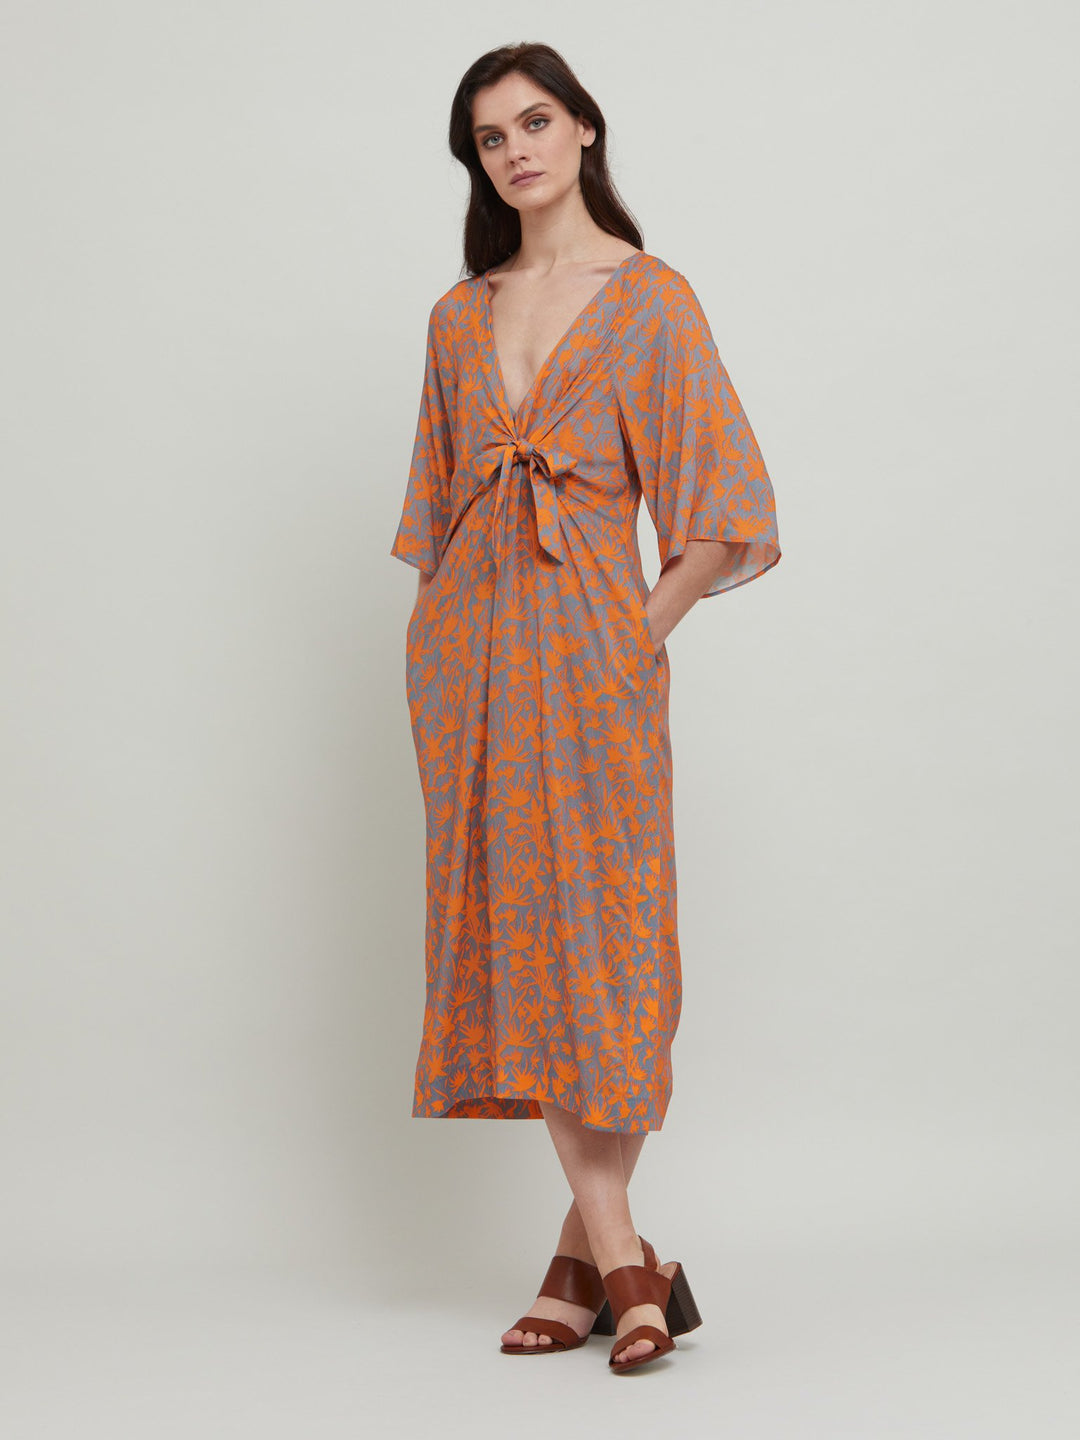 Introducing the Ailbhe, dress. This fun & easy fitting V-neck silhouette features front ties, slashed bodice, side seam pockets and falls to the mid-calf. Crafted in an adventurous and sophisticated rust & smoky blue printed breathable viscose.  Designed in Ireland by Helen McAlinden. Made in Europe. Free shipping to the EU & UK.